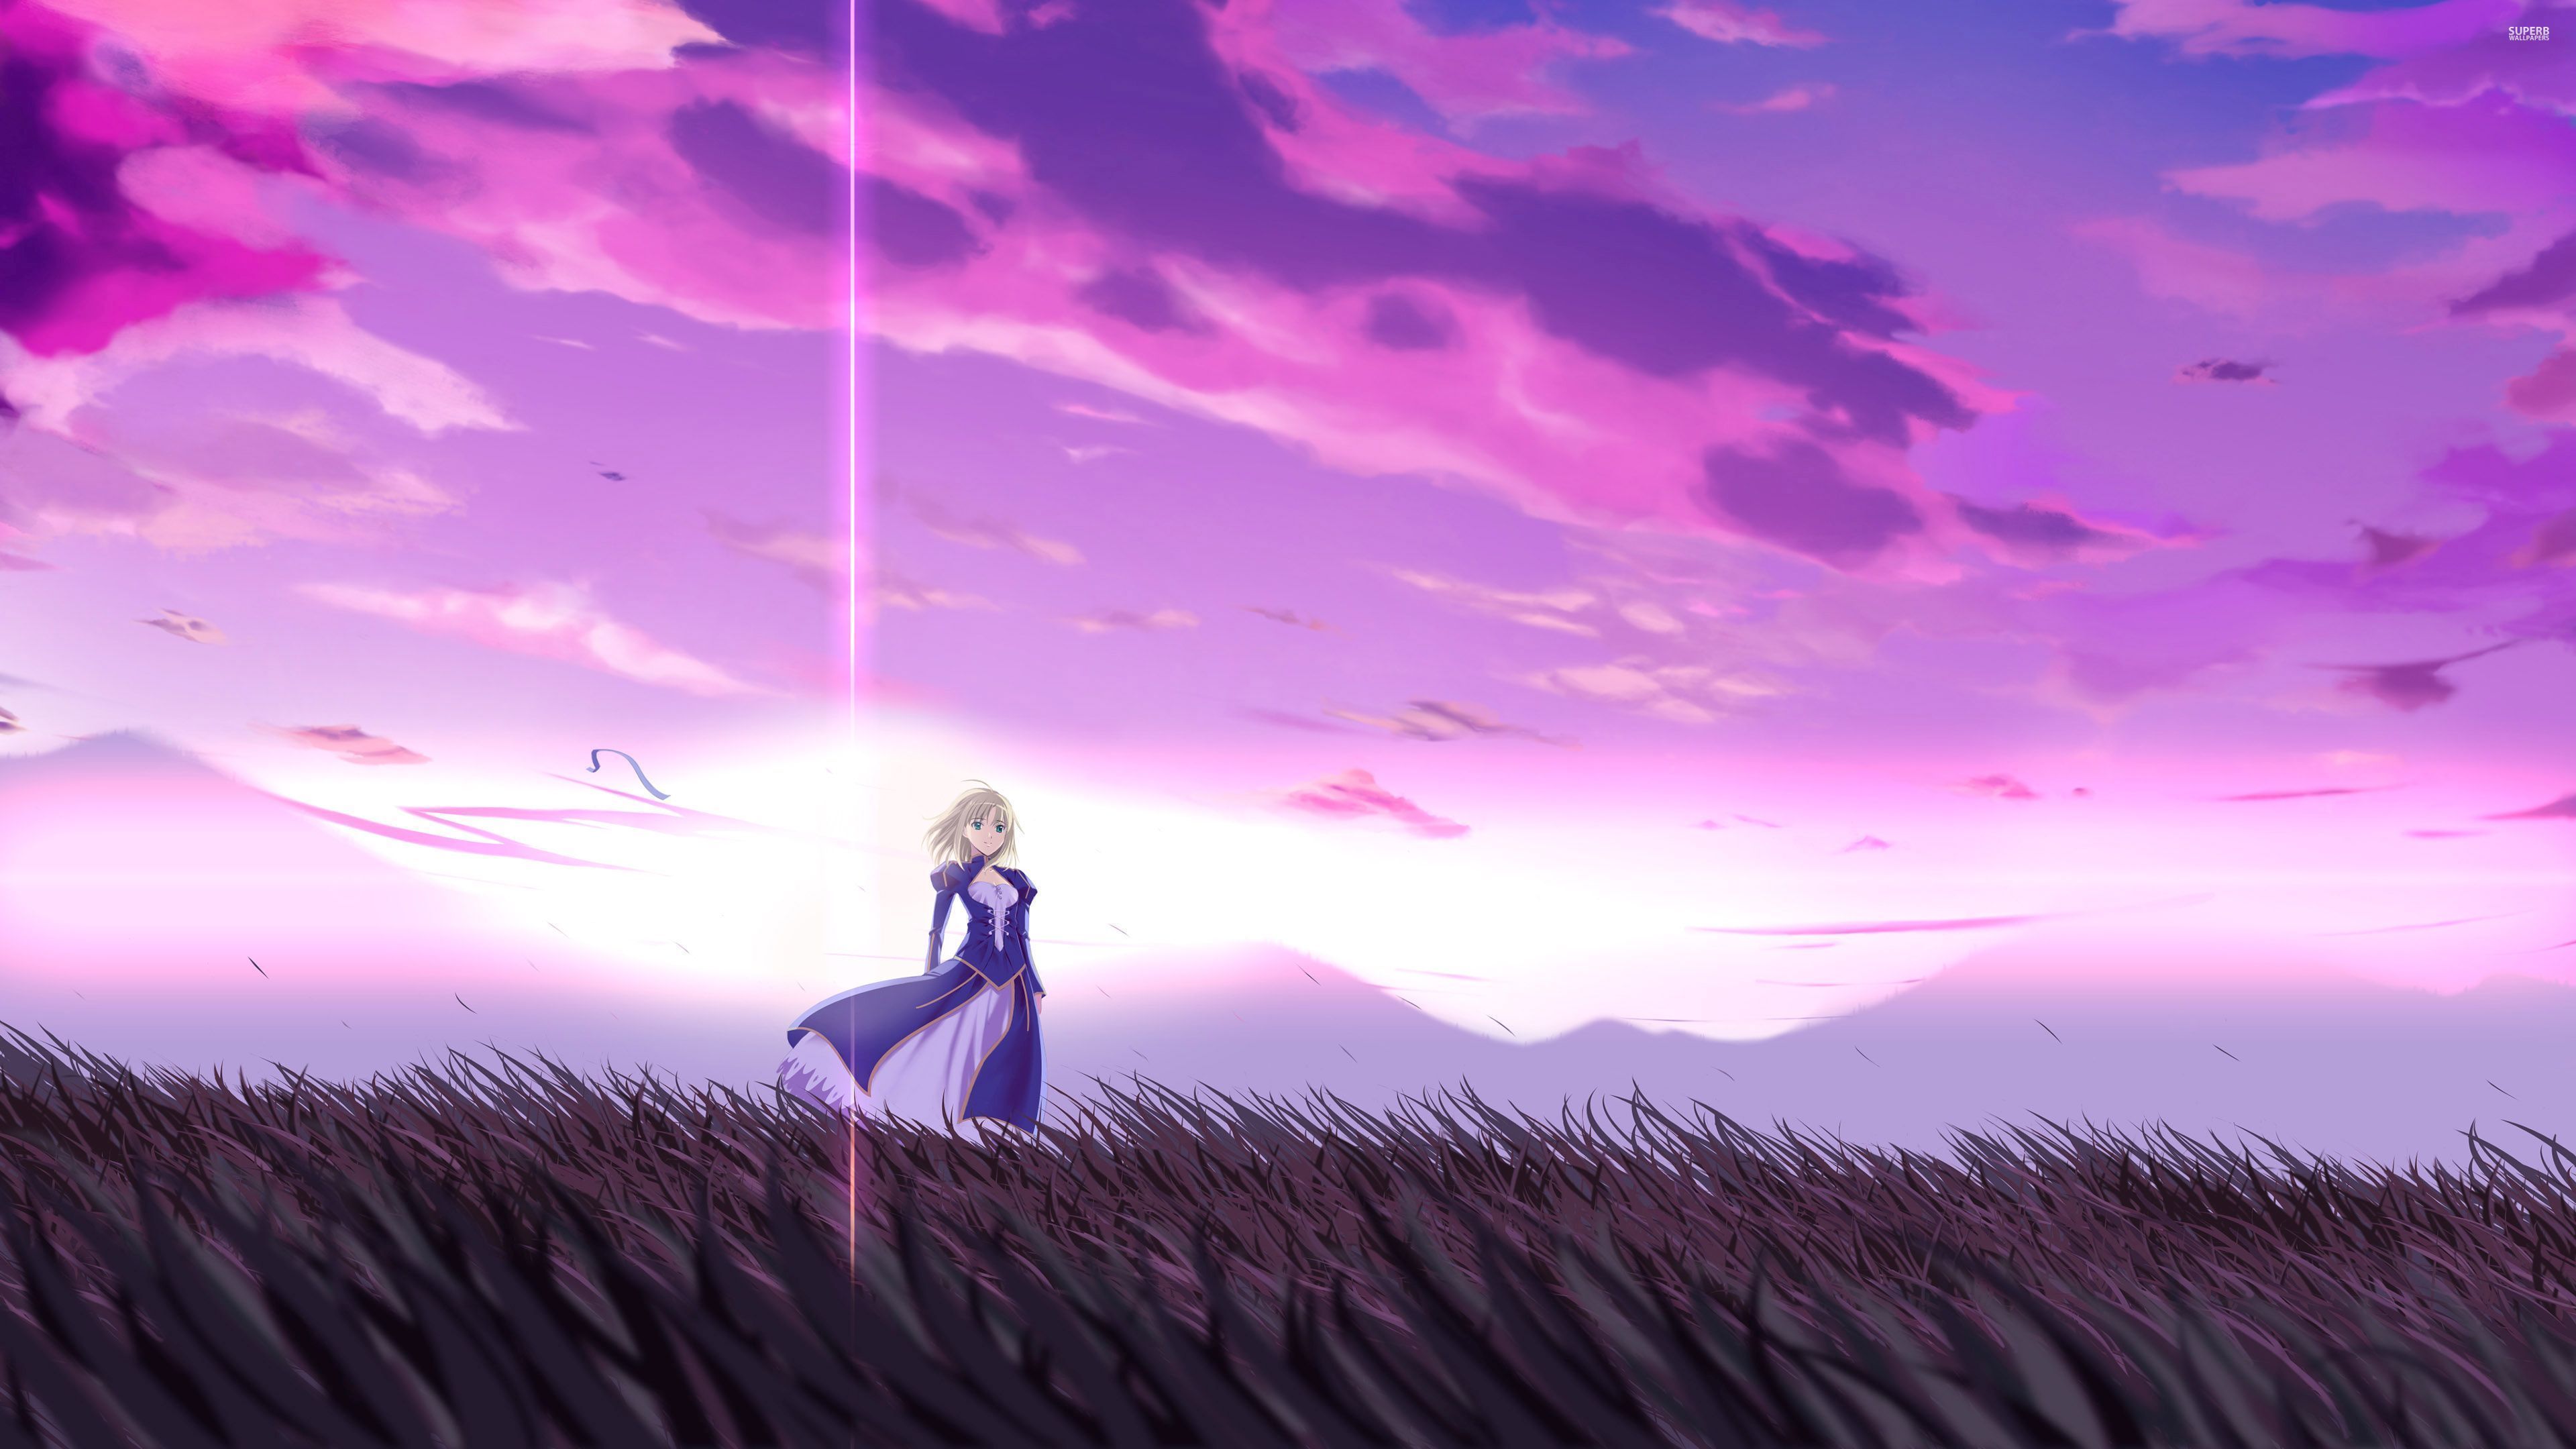 Saber - Fate/stay night wallpaper - Anime wallpapers - #32735